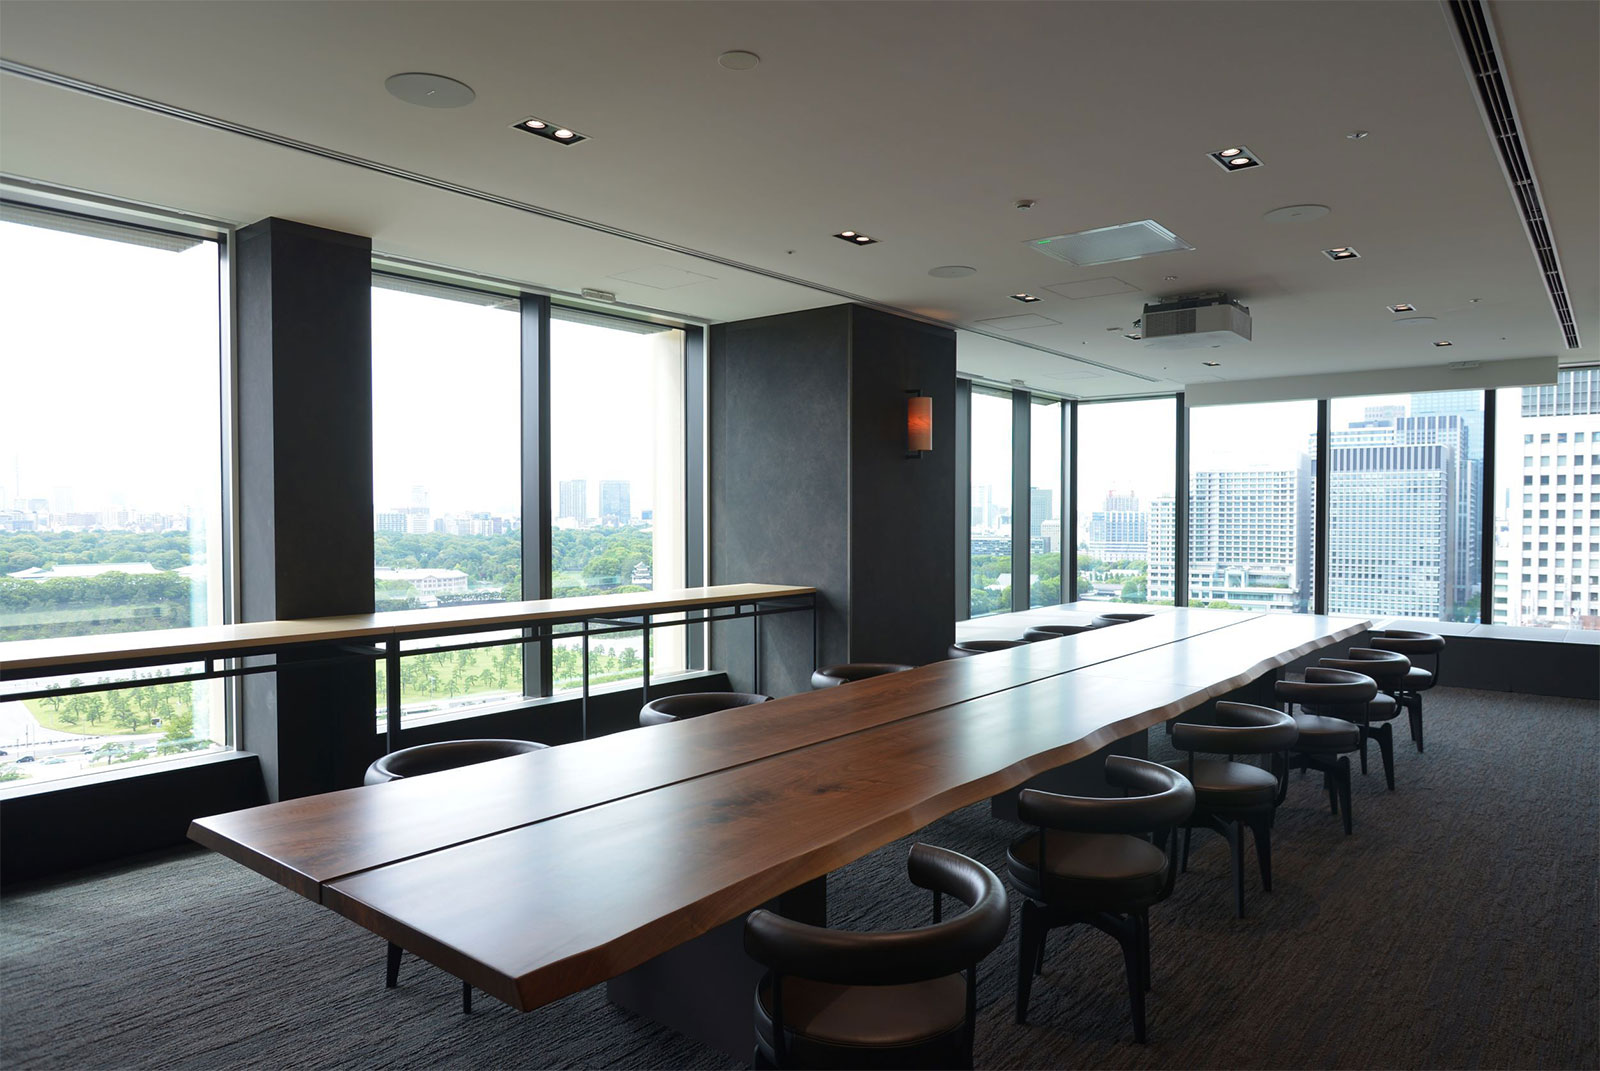 The "calm room" with a spectacular view that is also used for lunch and evening receptions during sessions.